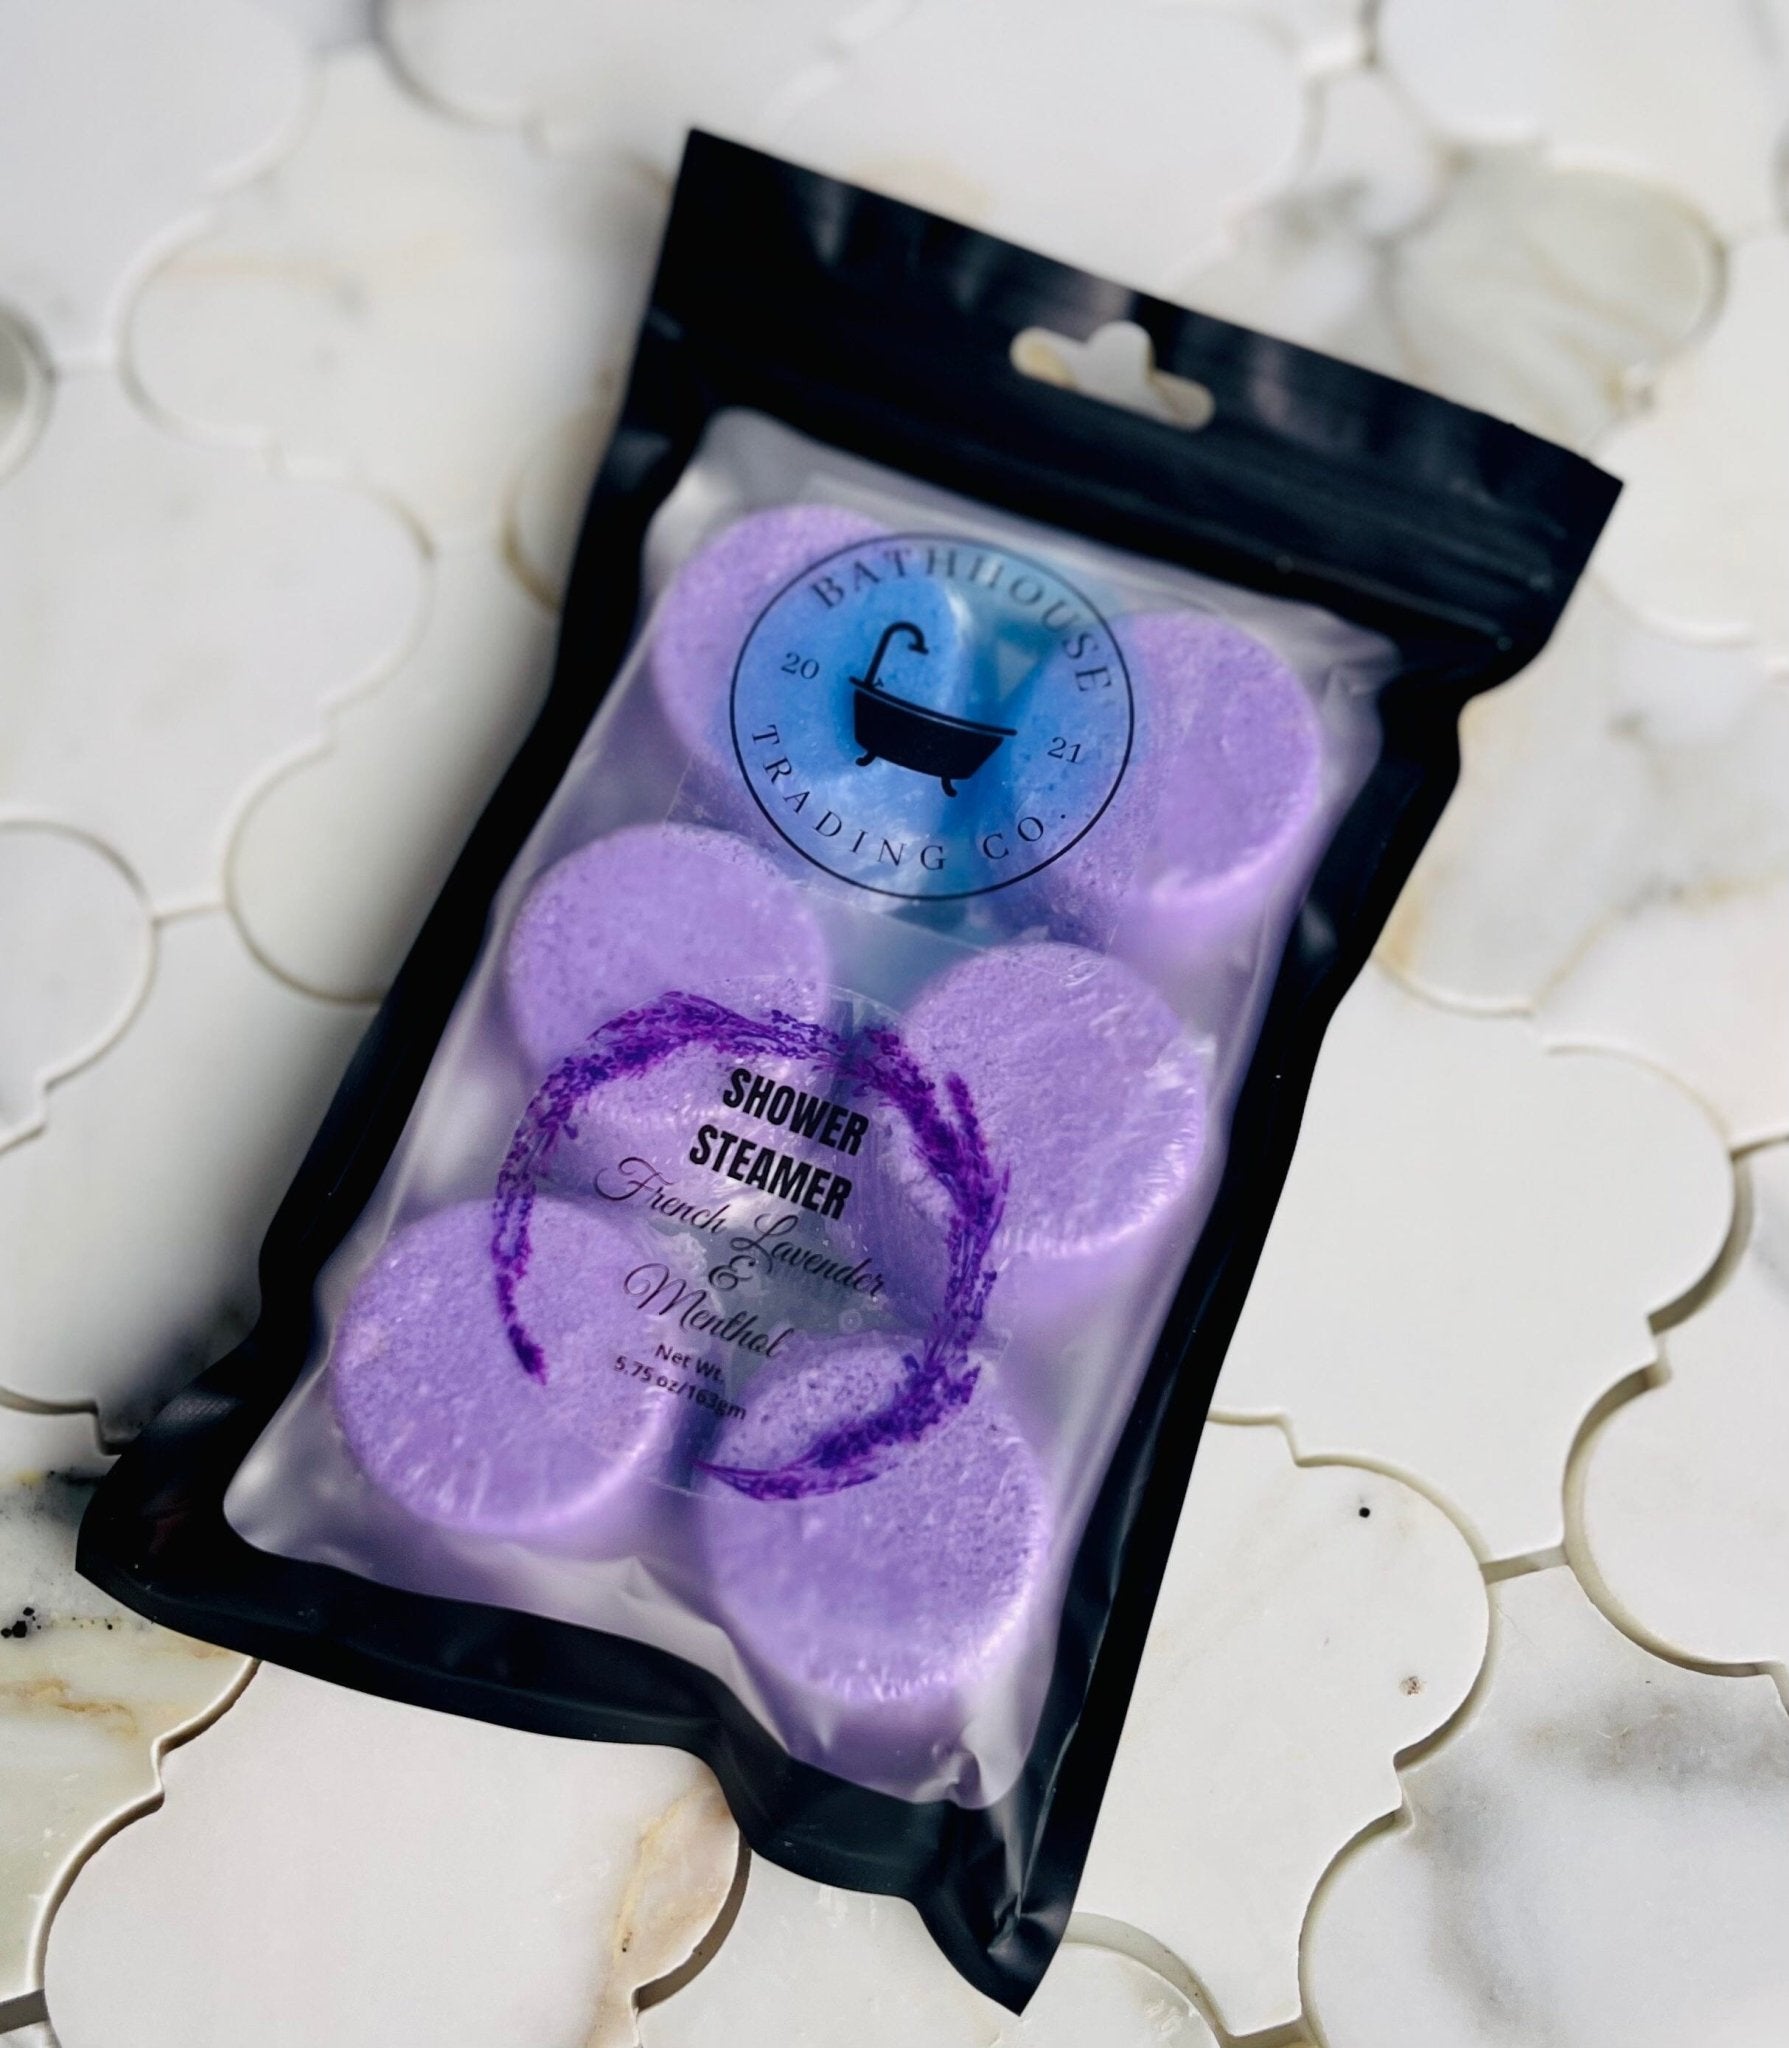 French Lavender &amp; Menthol Shower Steamers - Bathhouse Trading Company